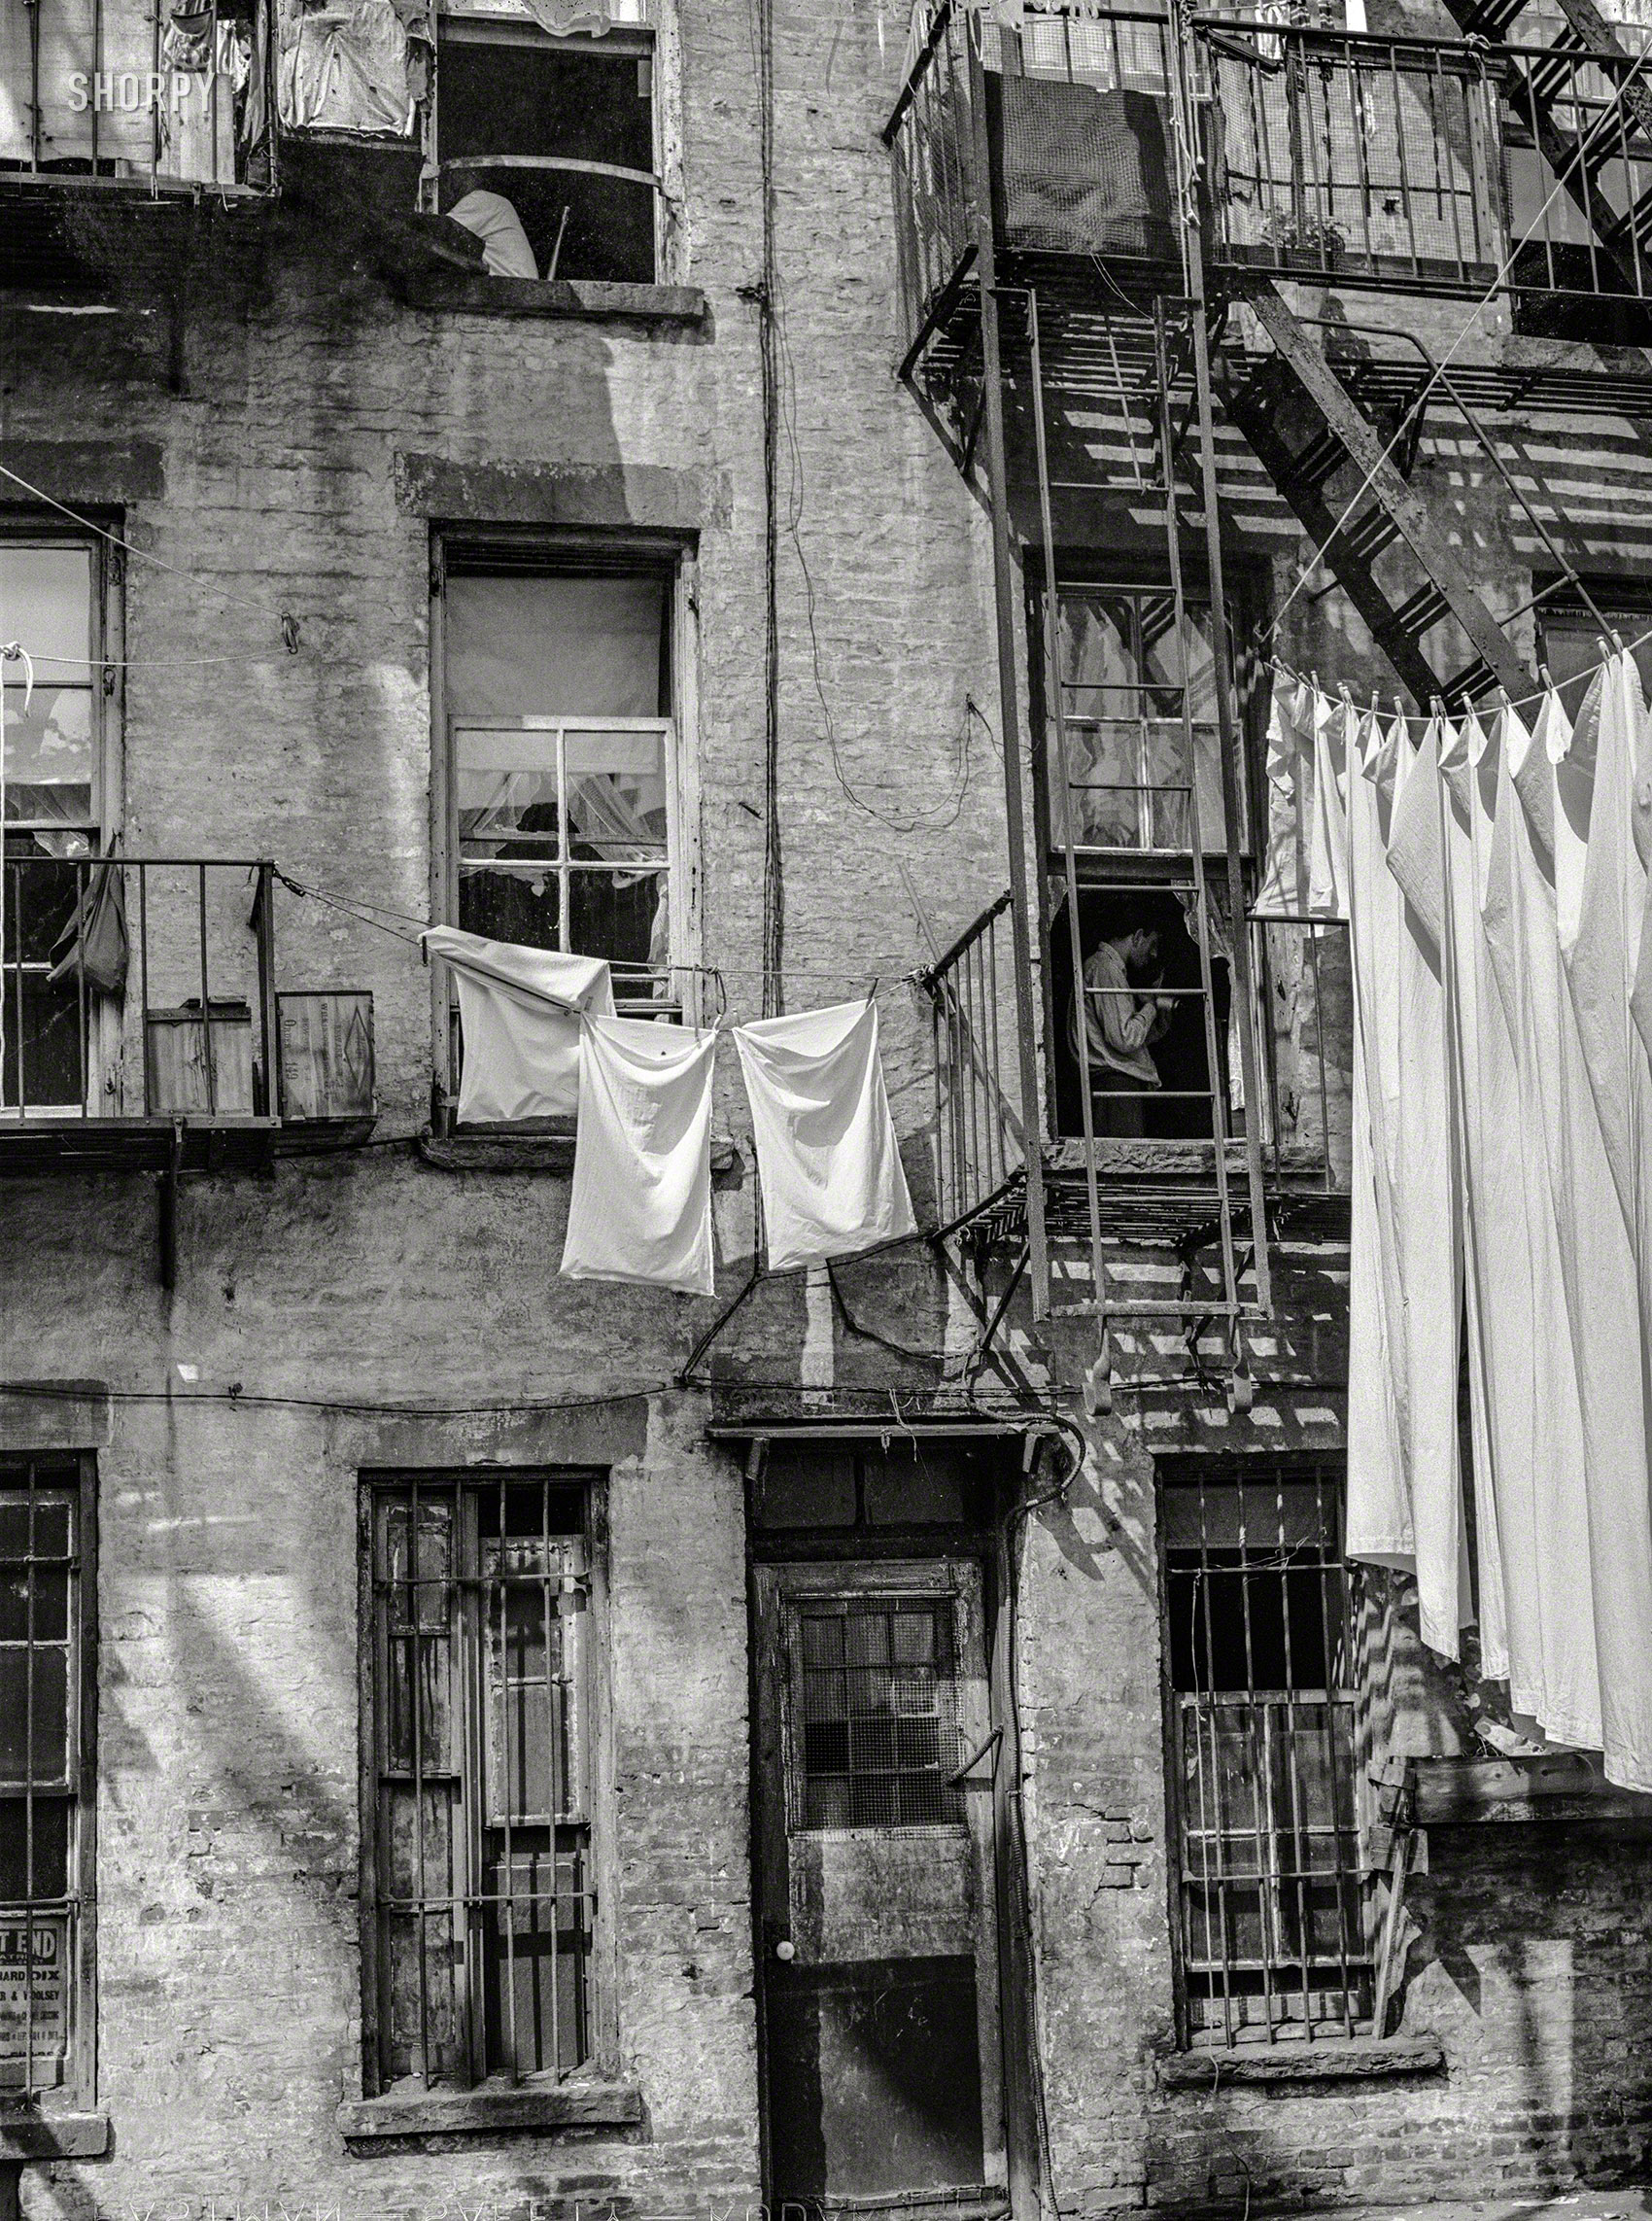 1938. "New York, New York. East 63rd Street apartments." Medium format negative by Sheldon Dick for the Farm Security Administration. View full size.